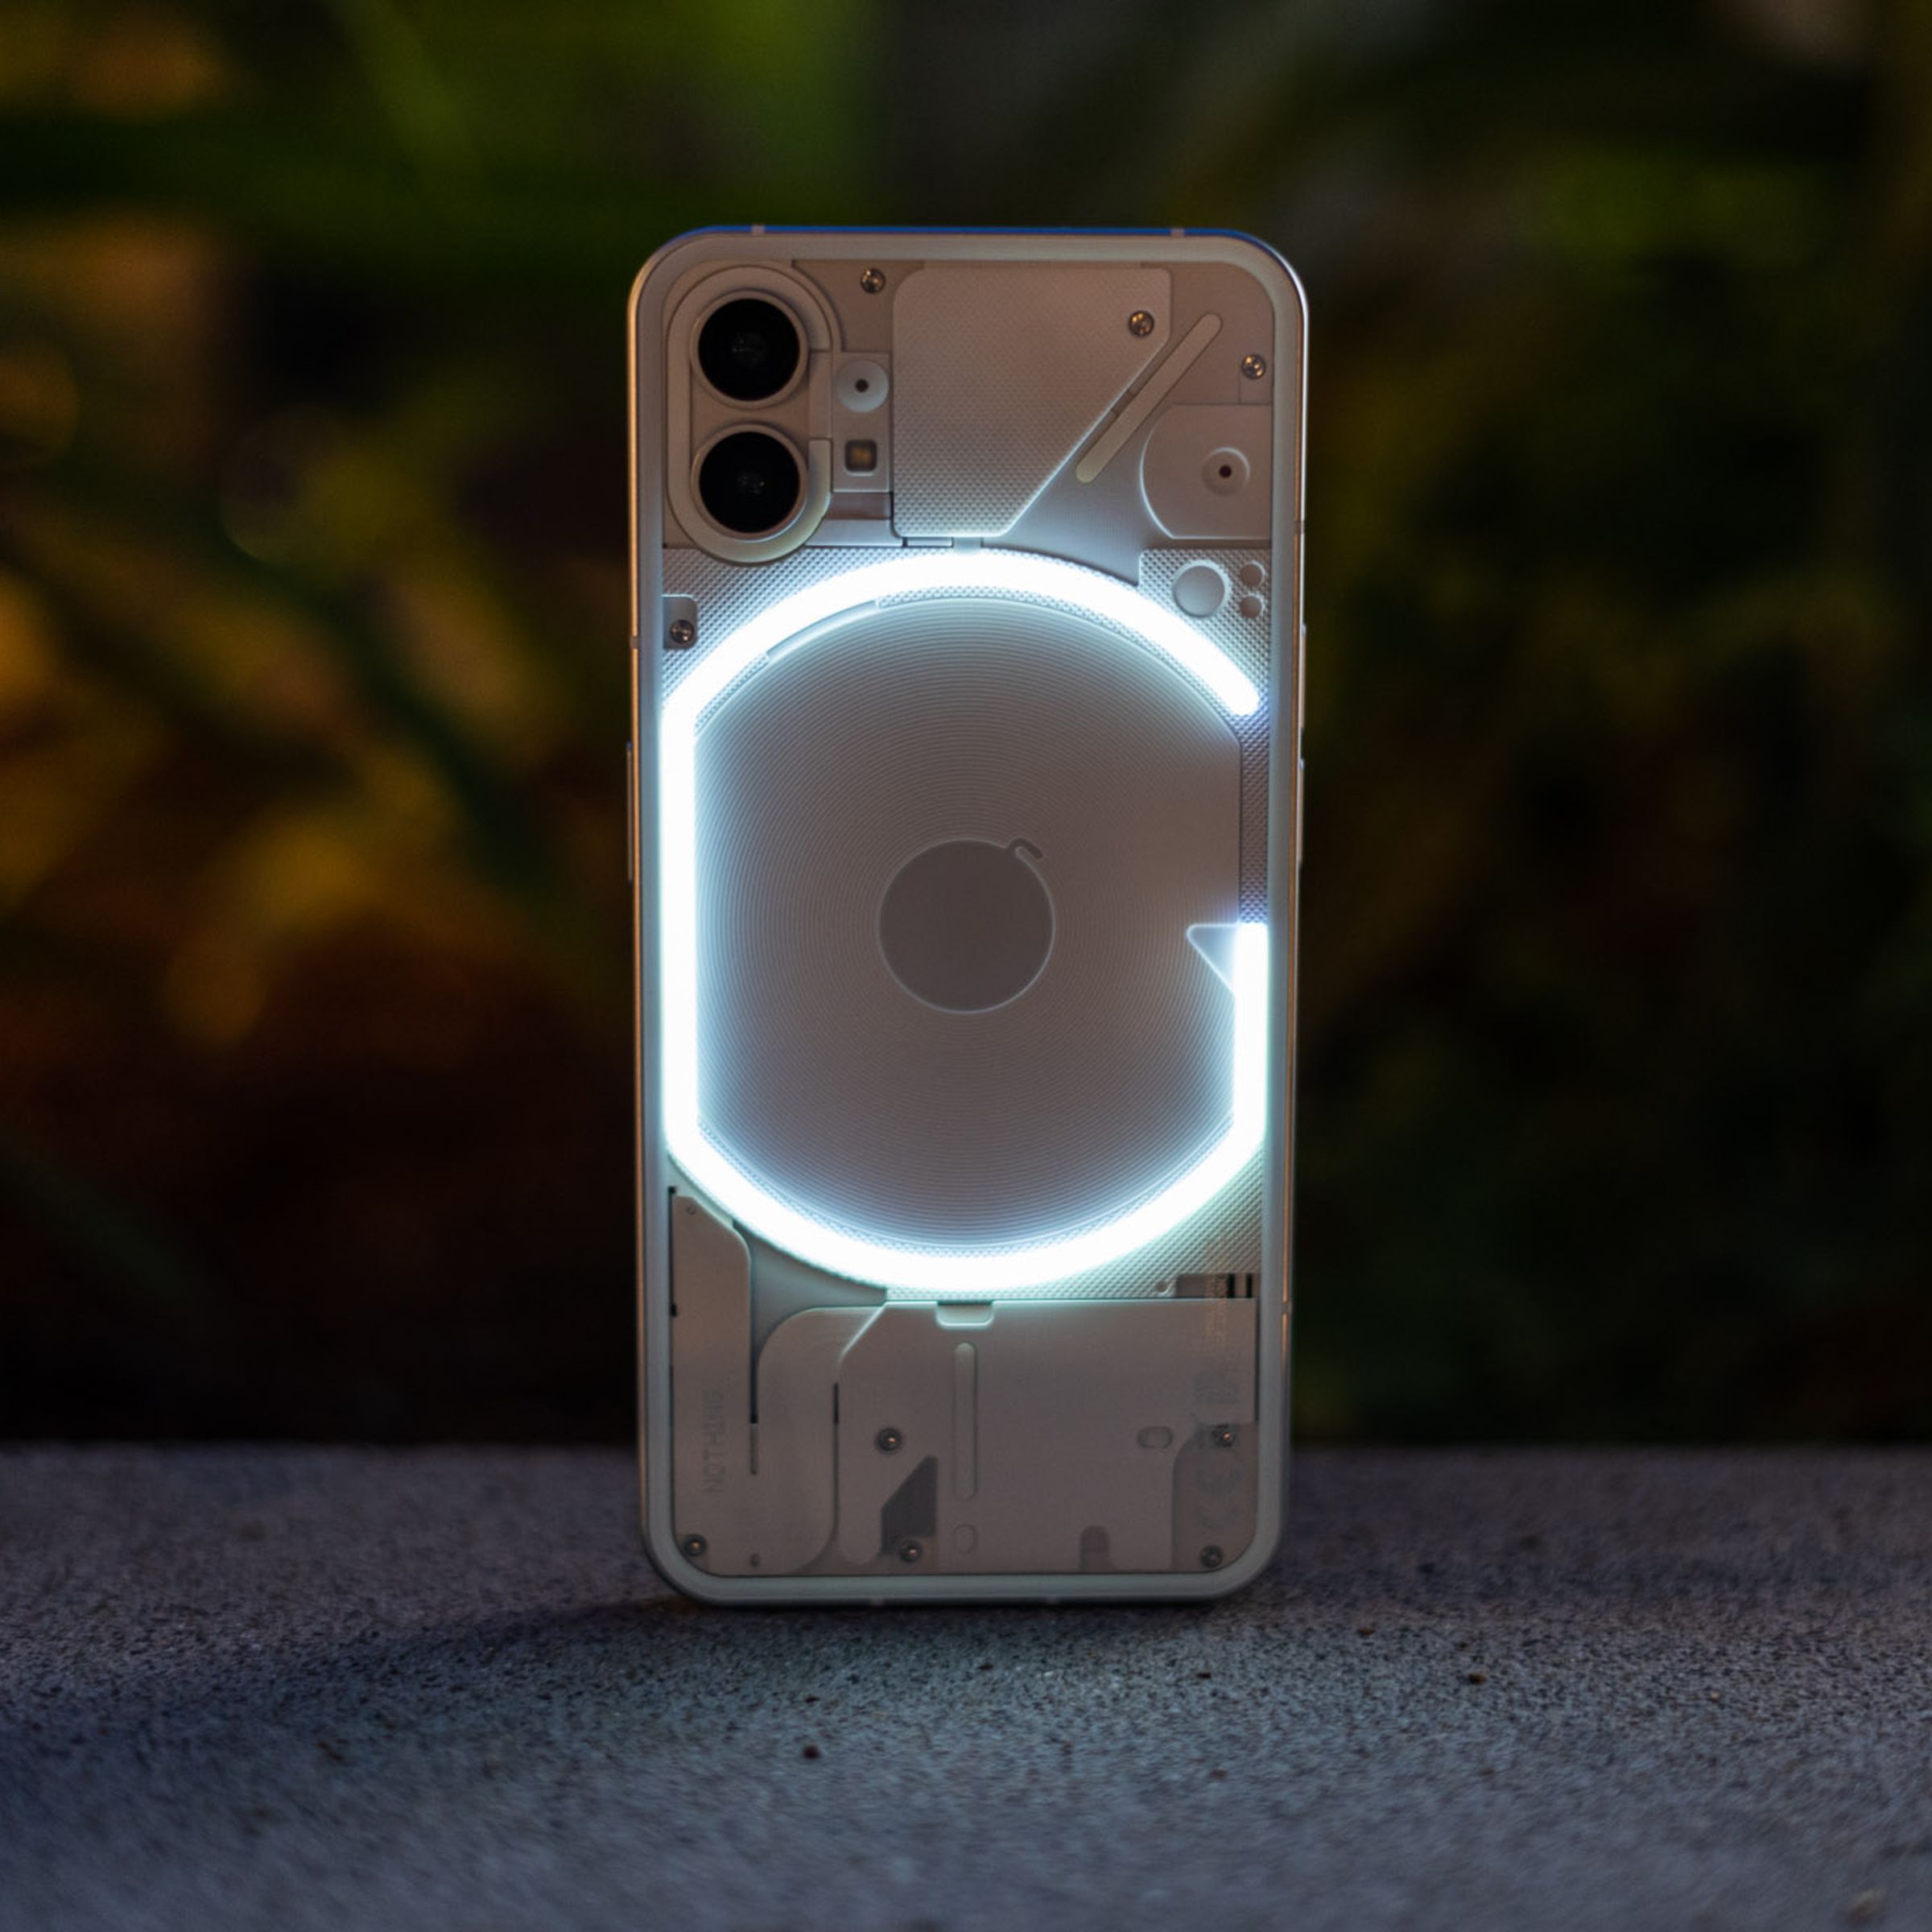 The Phone 1 with its back lights illuminated.